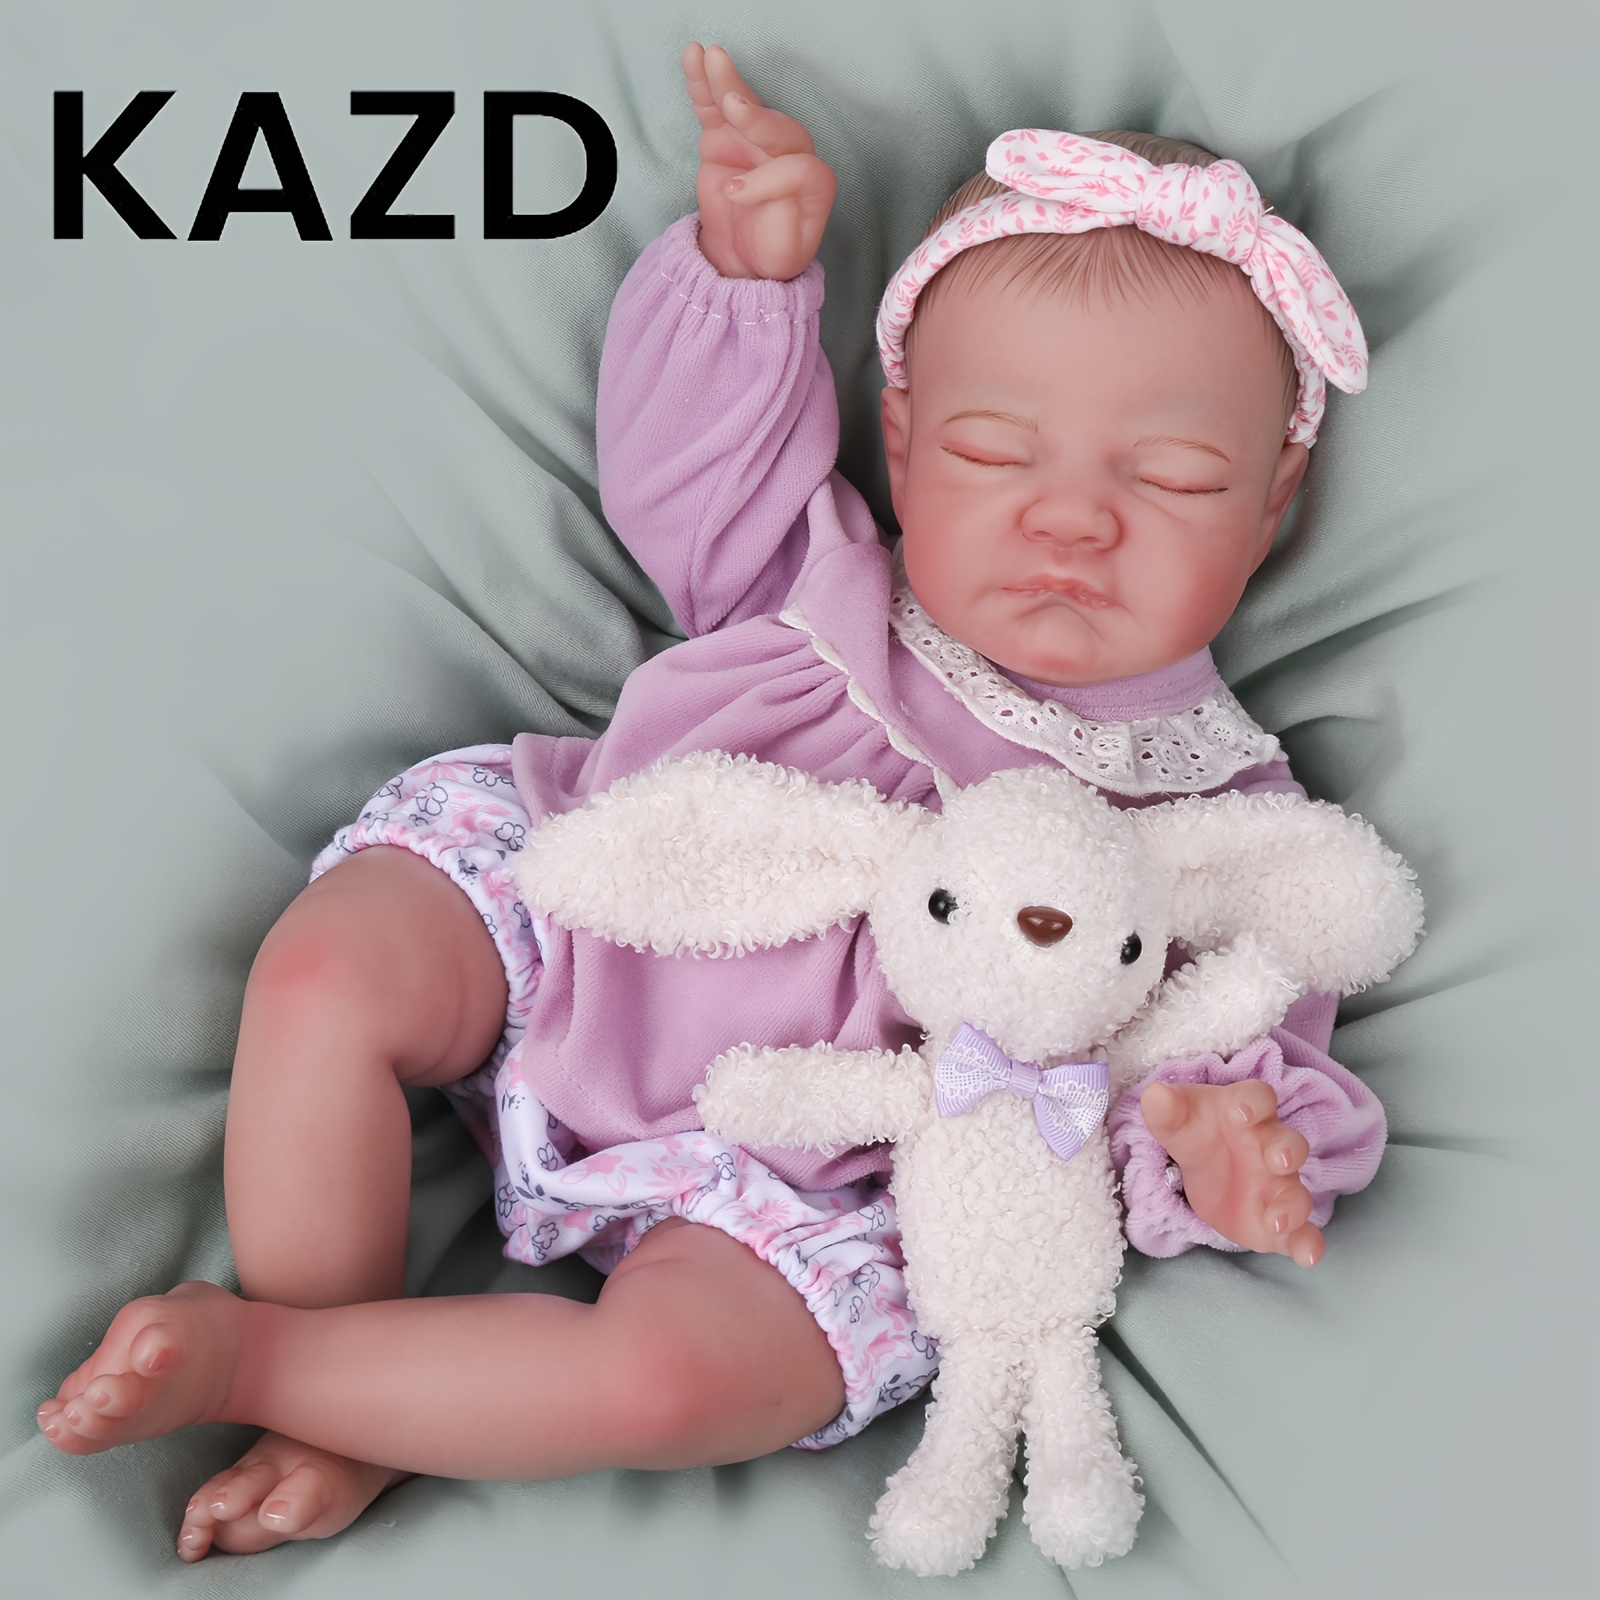 

Kazd Lifelike Reborn Baby Dolls - 20 Inch Soft Body Realistic Newborn Doll Sleeping Girl August Real Life Dolls With Clothes And Toy Accessories Gift For Kids Age 3+